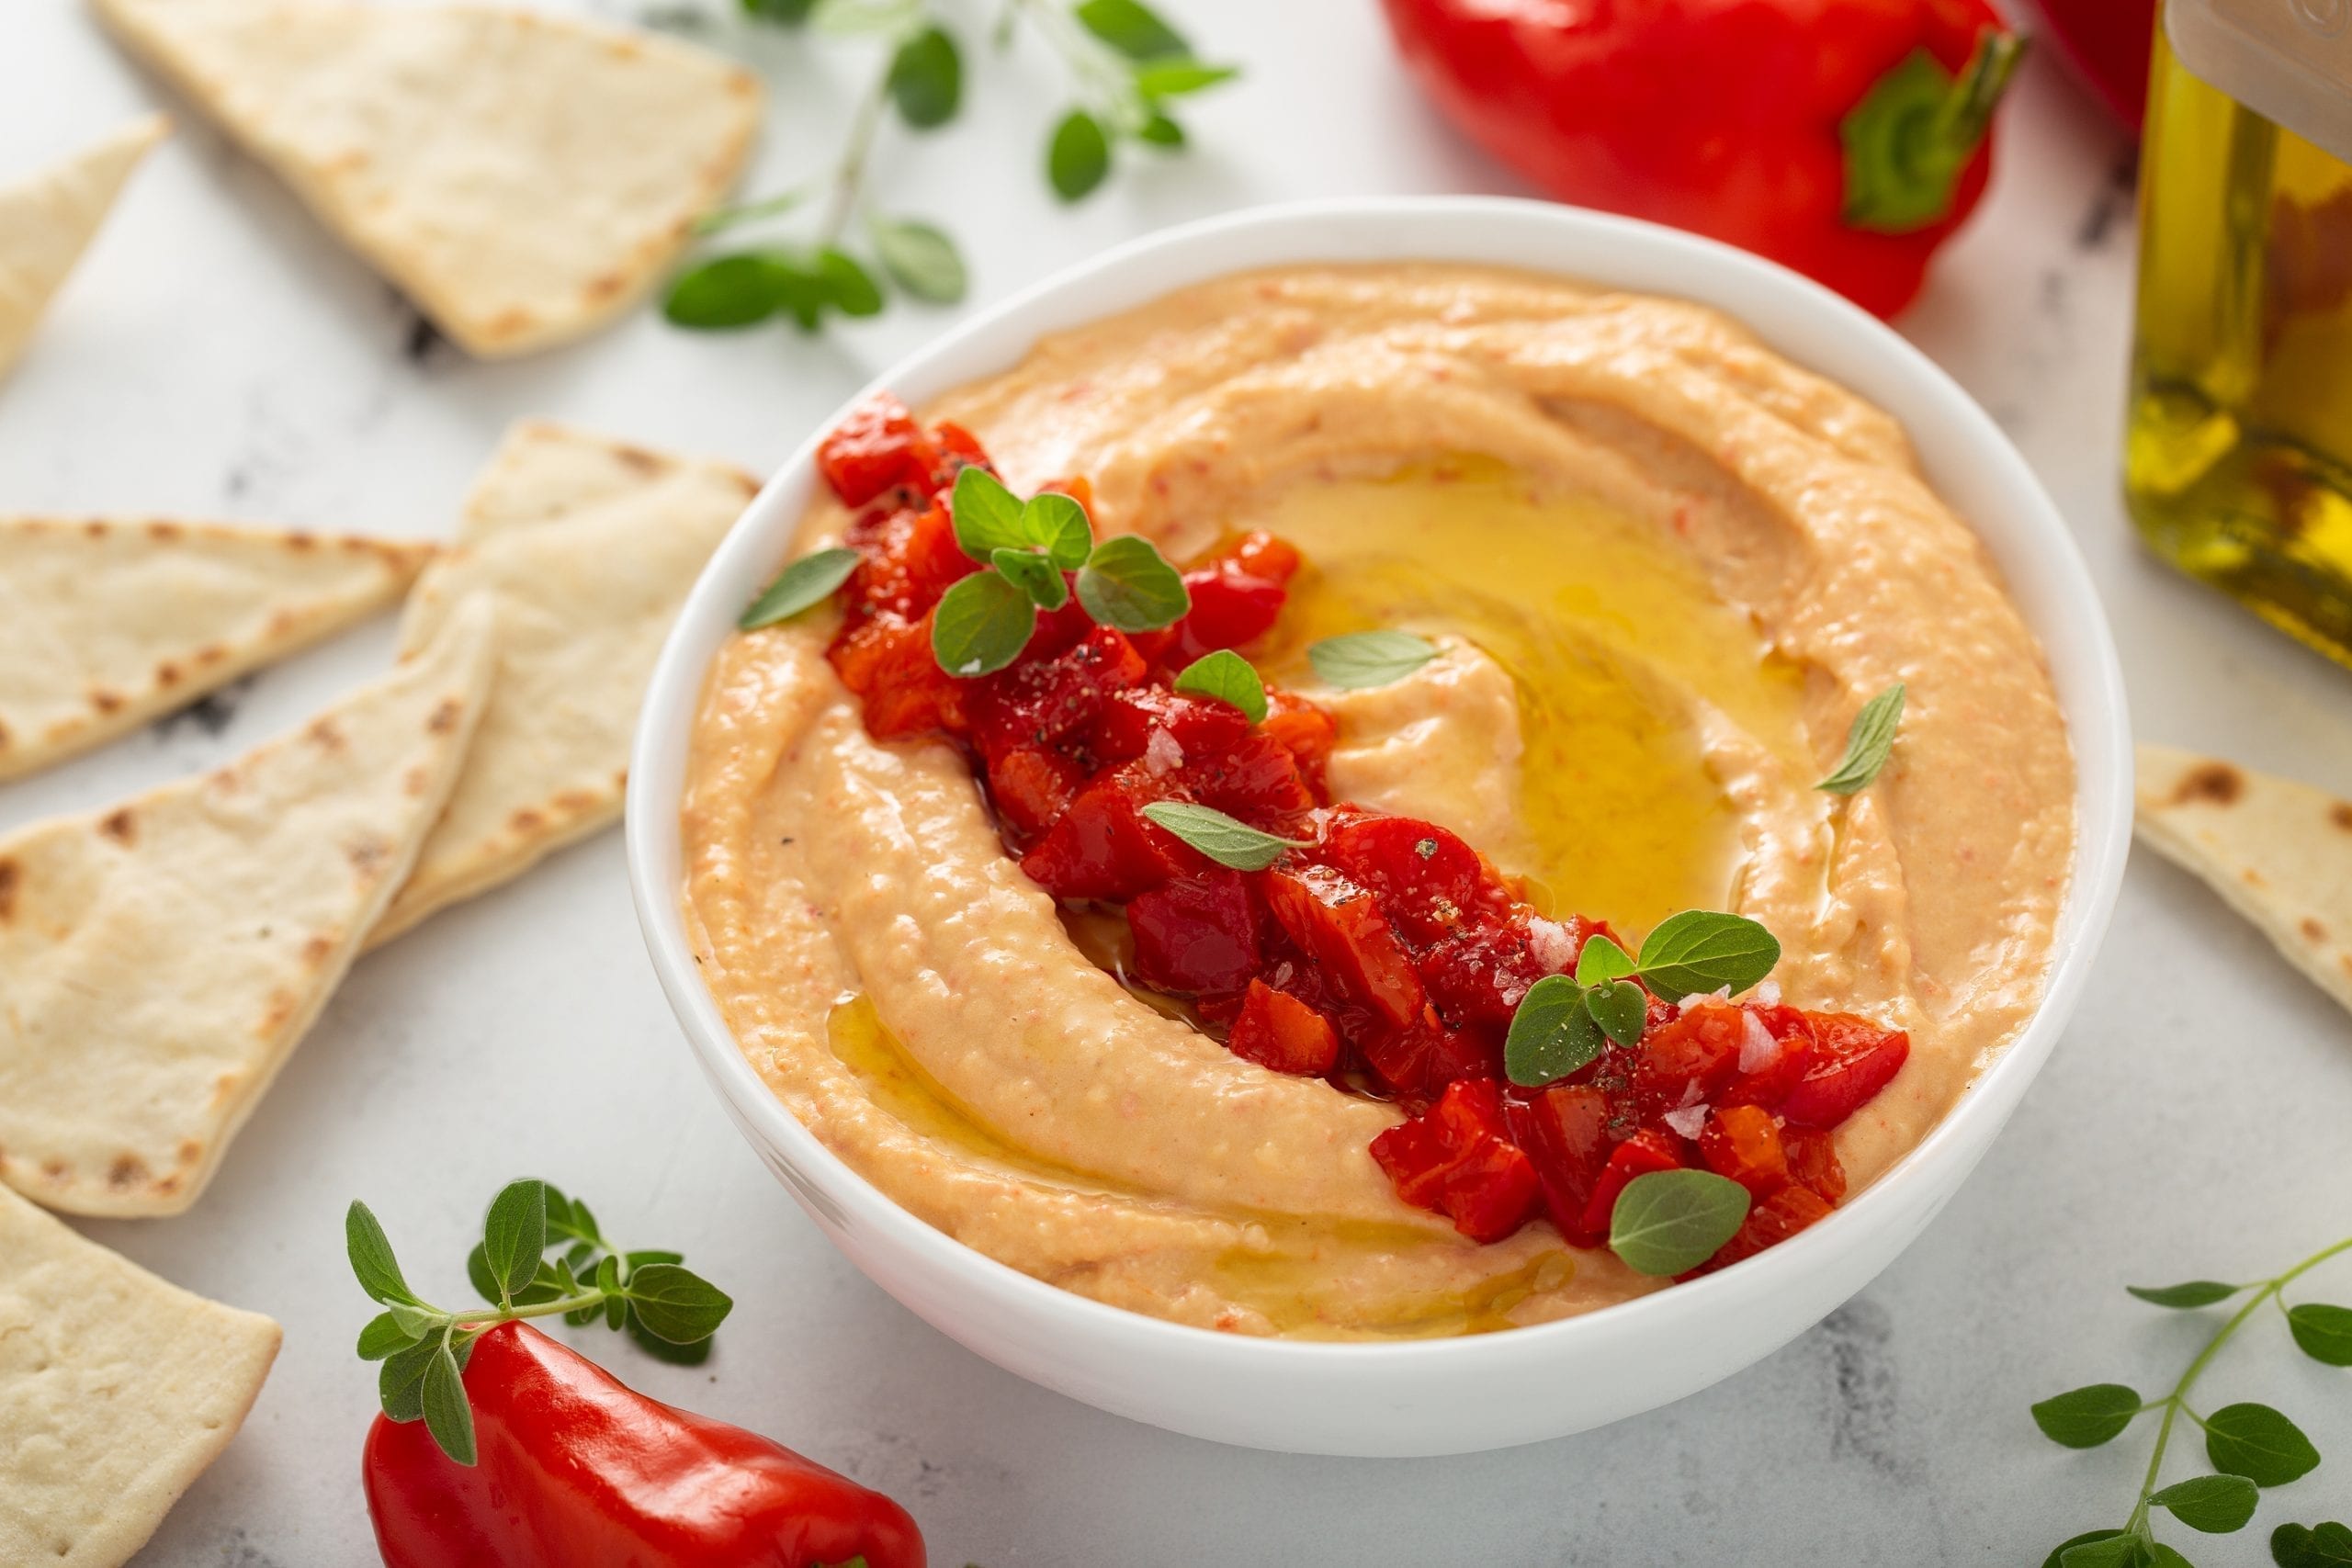 Sabra Recalls Some Classic Hummus Products Due to Salmonella Risk